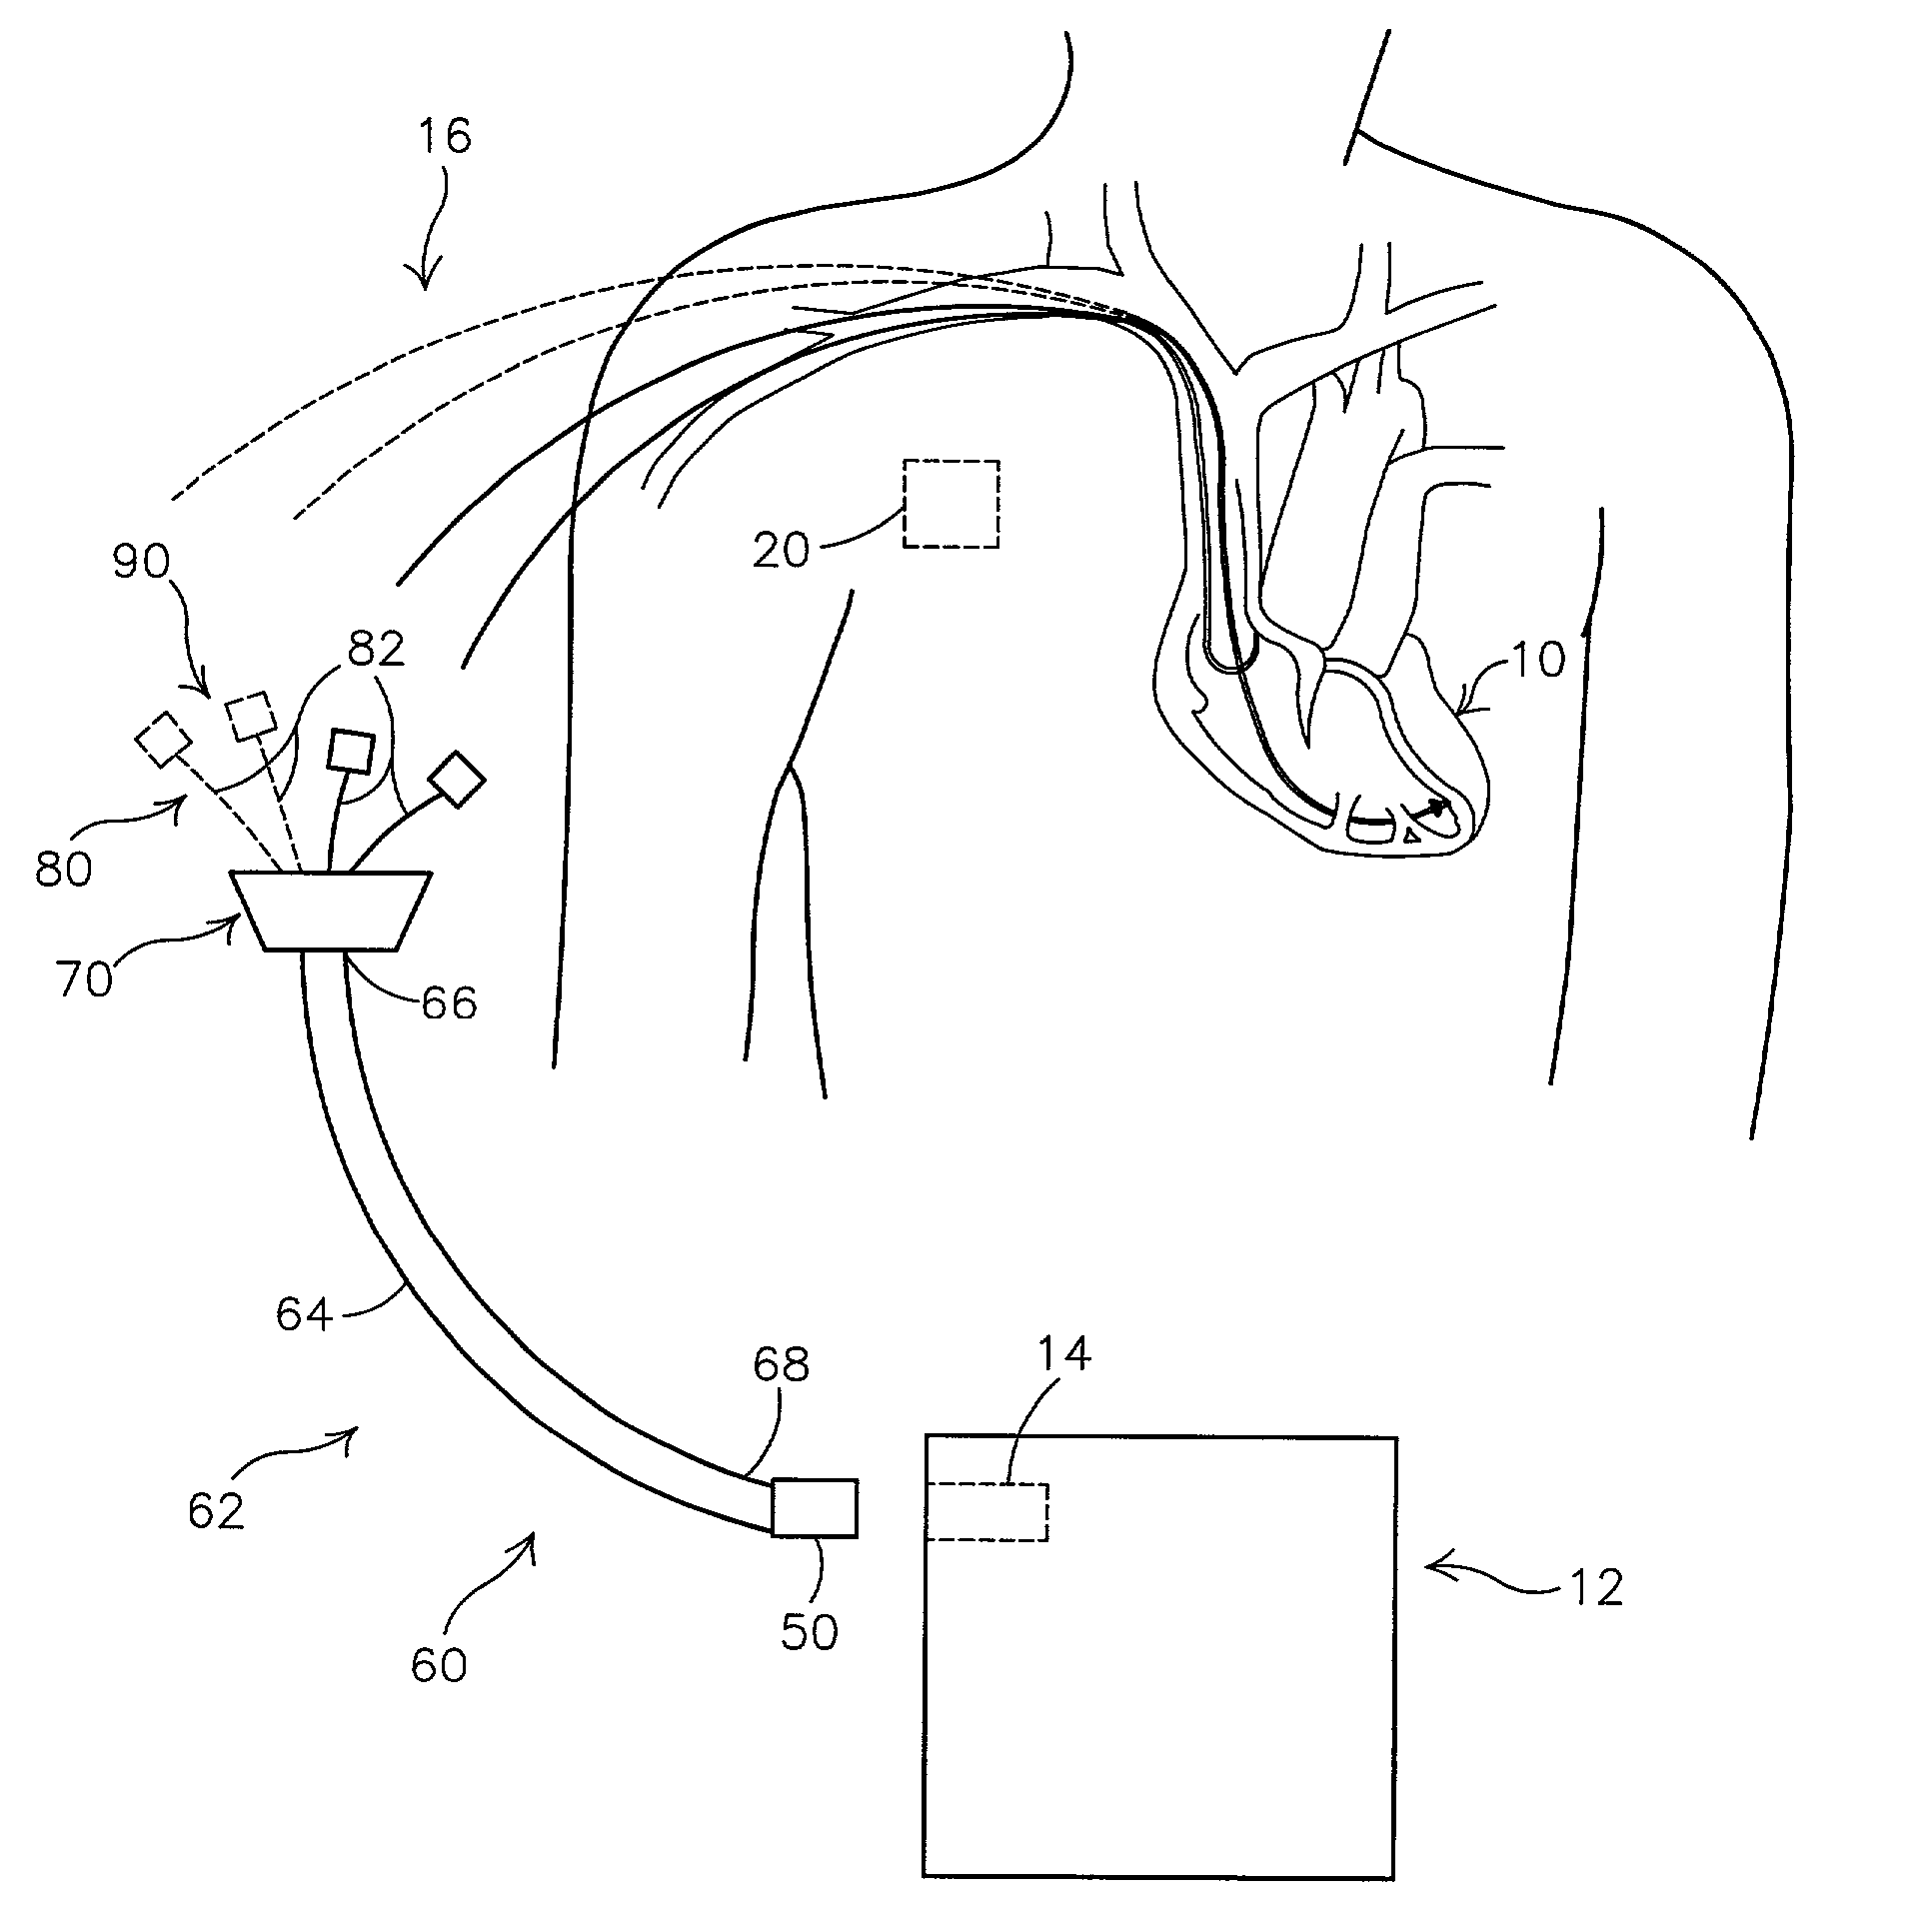 Bi-atrial and/or bi-ventricular patient safety cable and methods regarding same